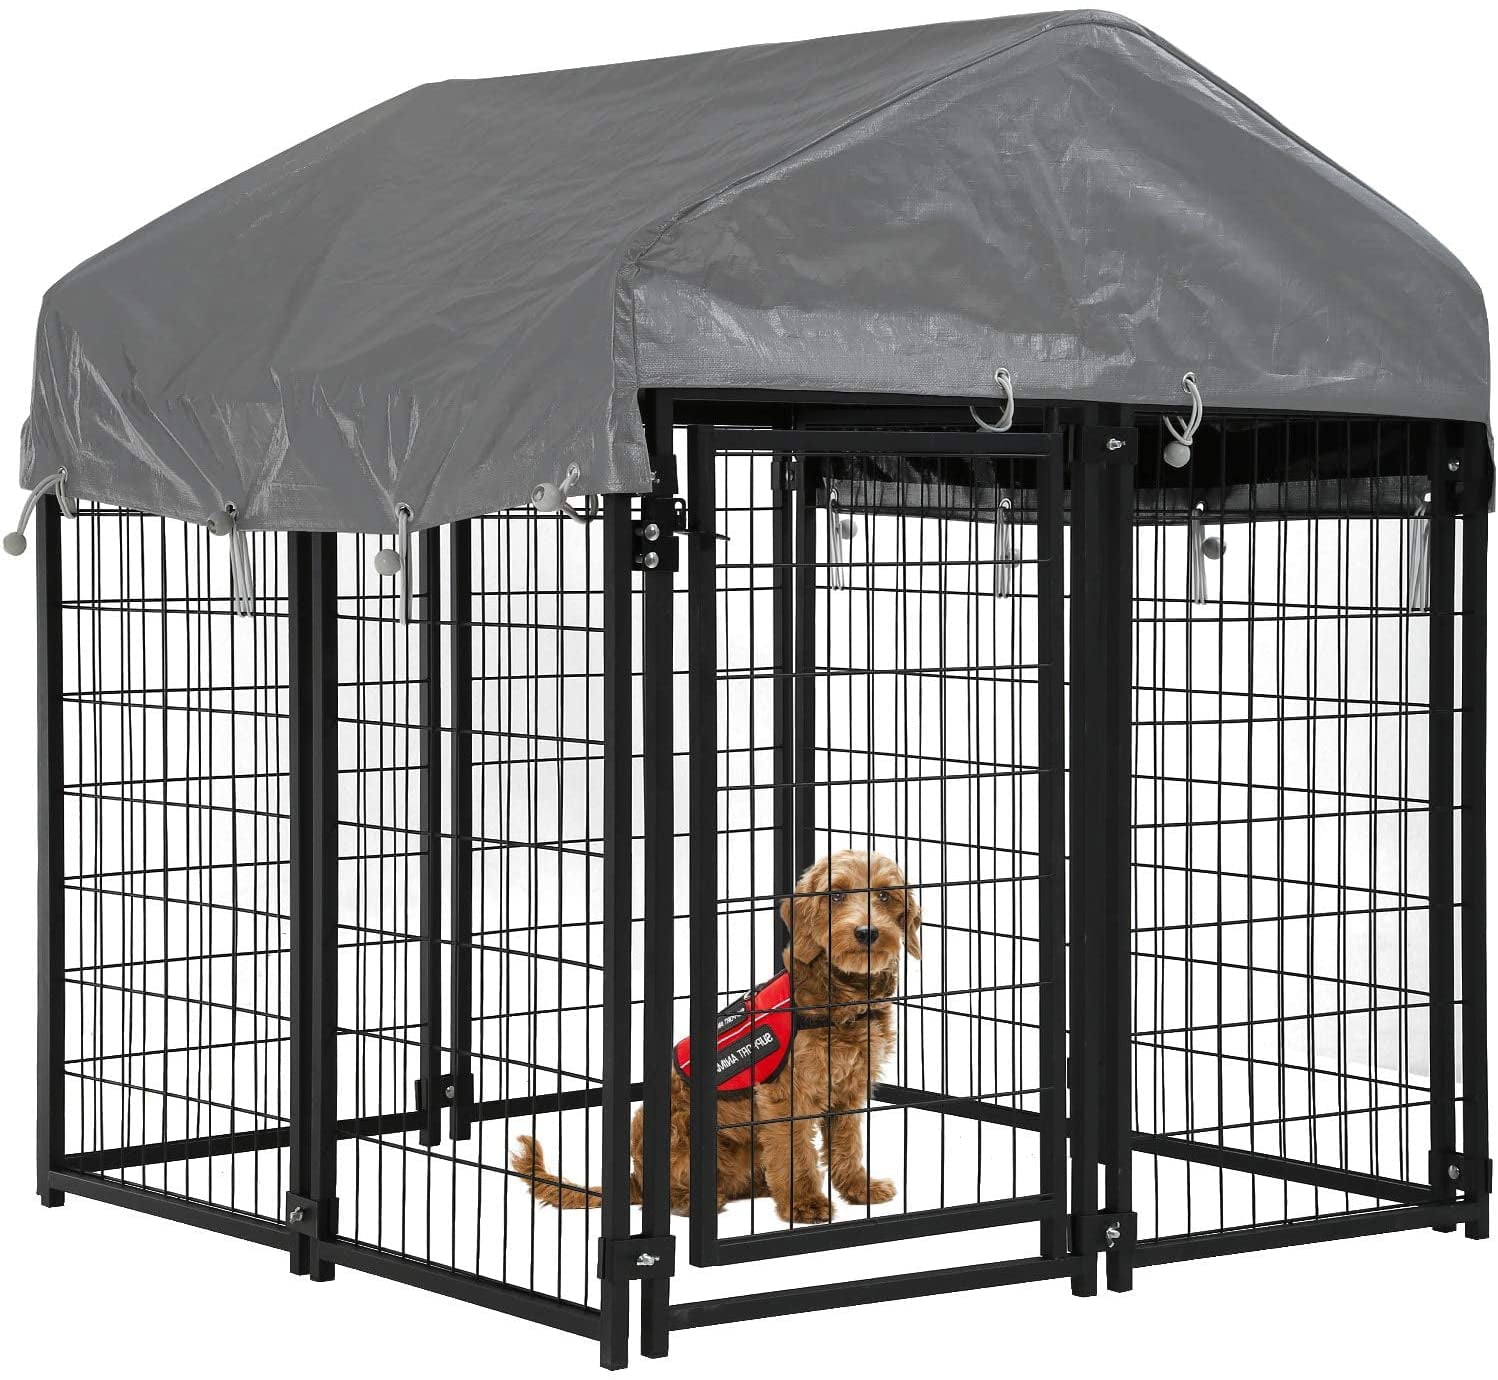 4 x 4 x 4.3,7.5 x 3.75 x 5.8 Feet BestPet Dog Crate Pet Kennel Cage Puppy Playpen Wire Animal Metal Camping Indoor Outdoor Cage for Large Dogs with Roof 